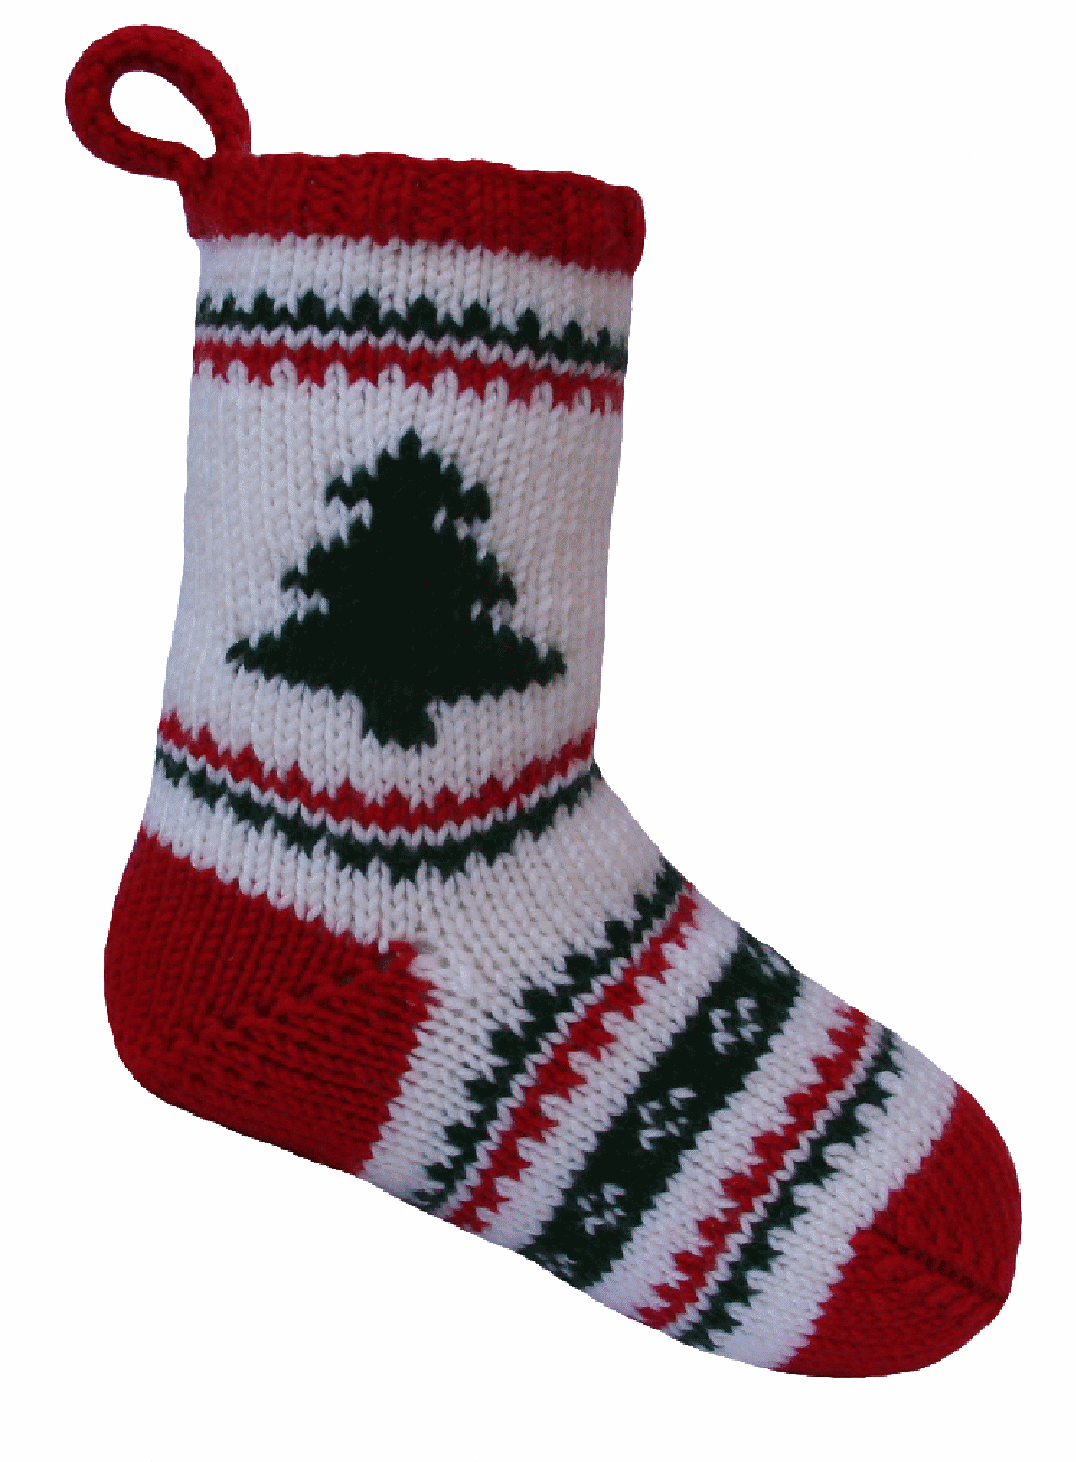 Free Knitting Pattern for Christmas Stocking With Tree